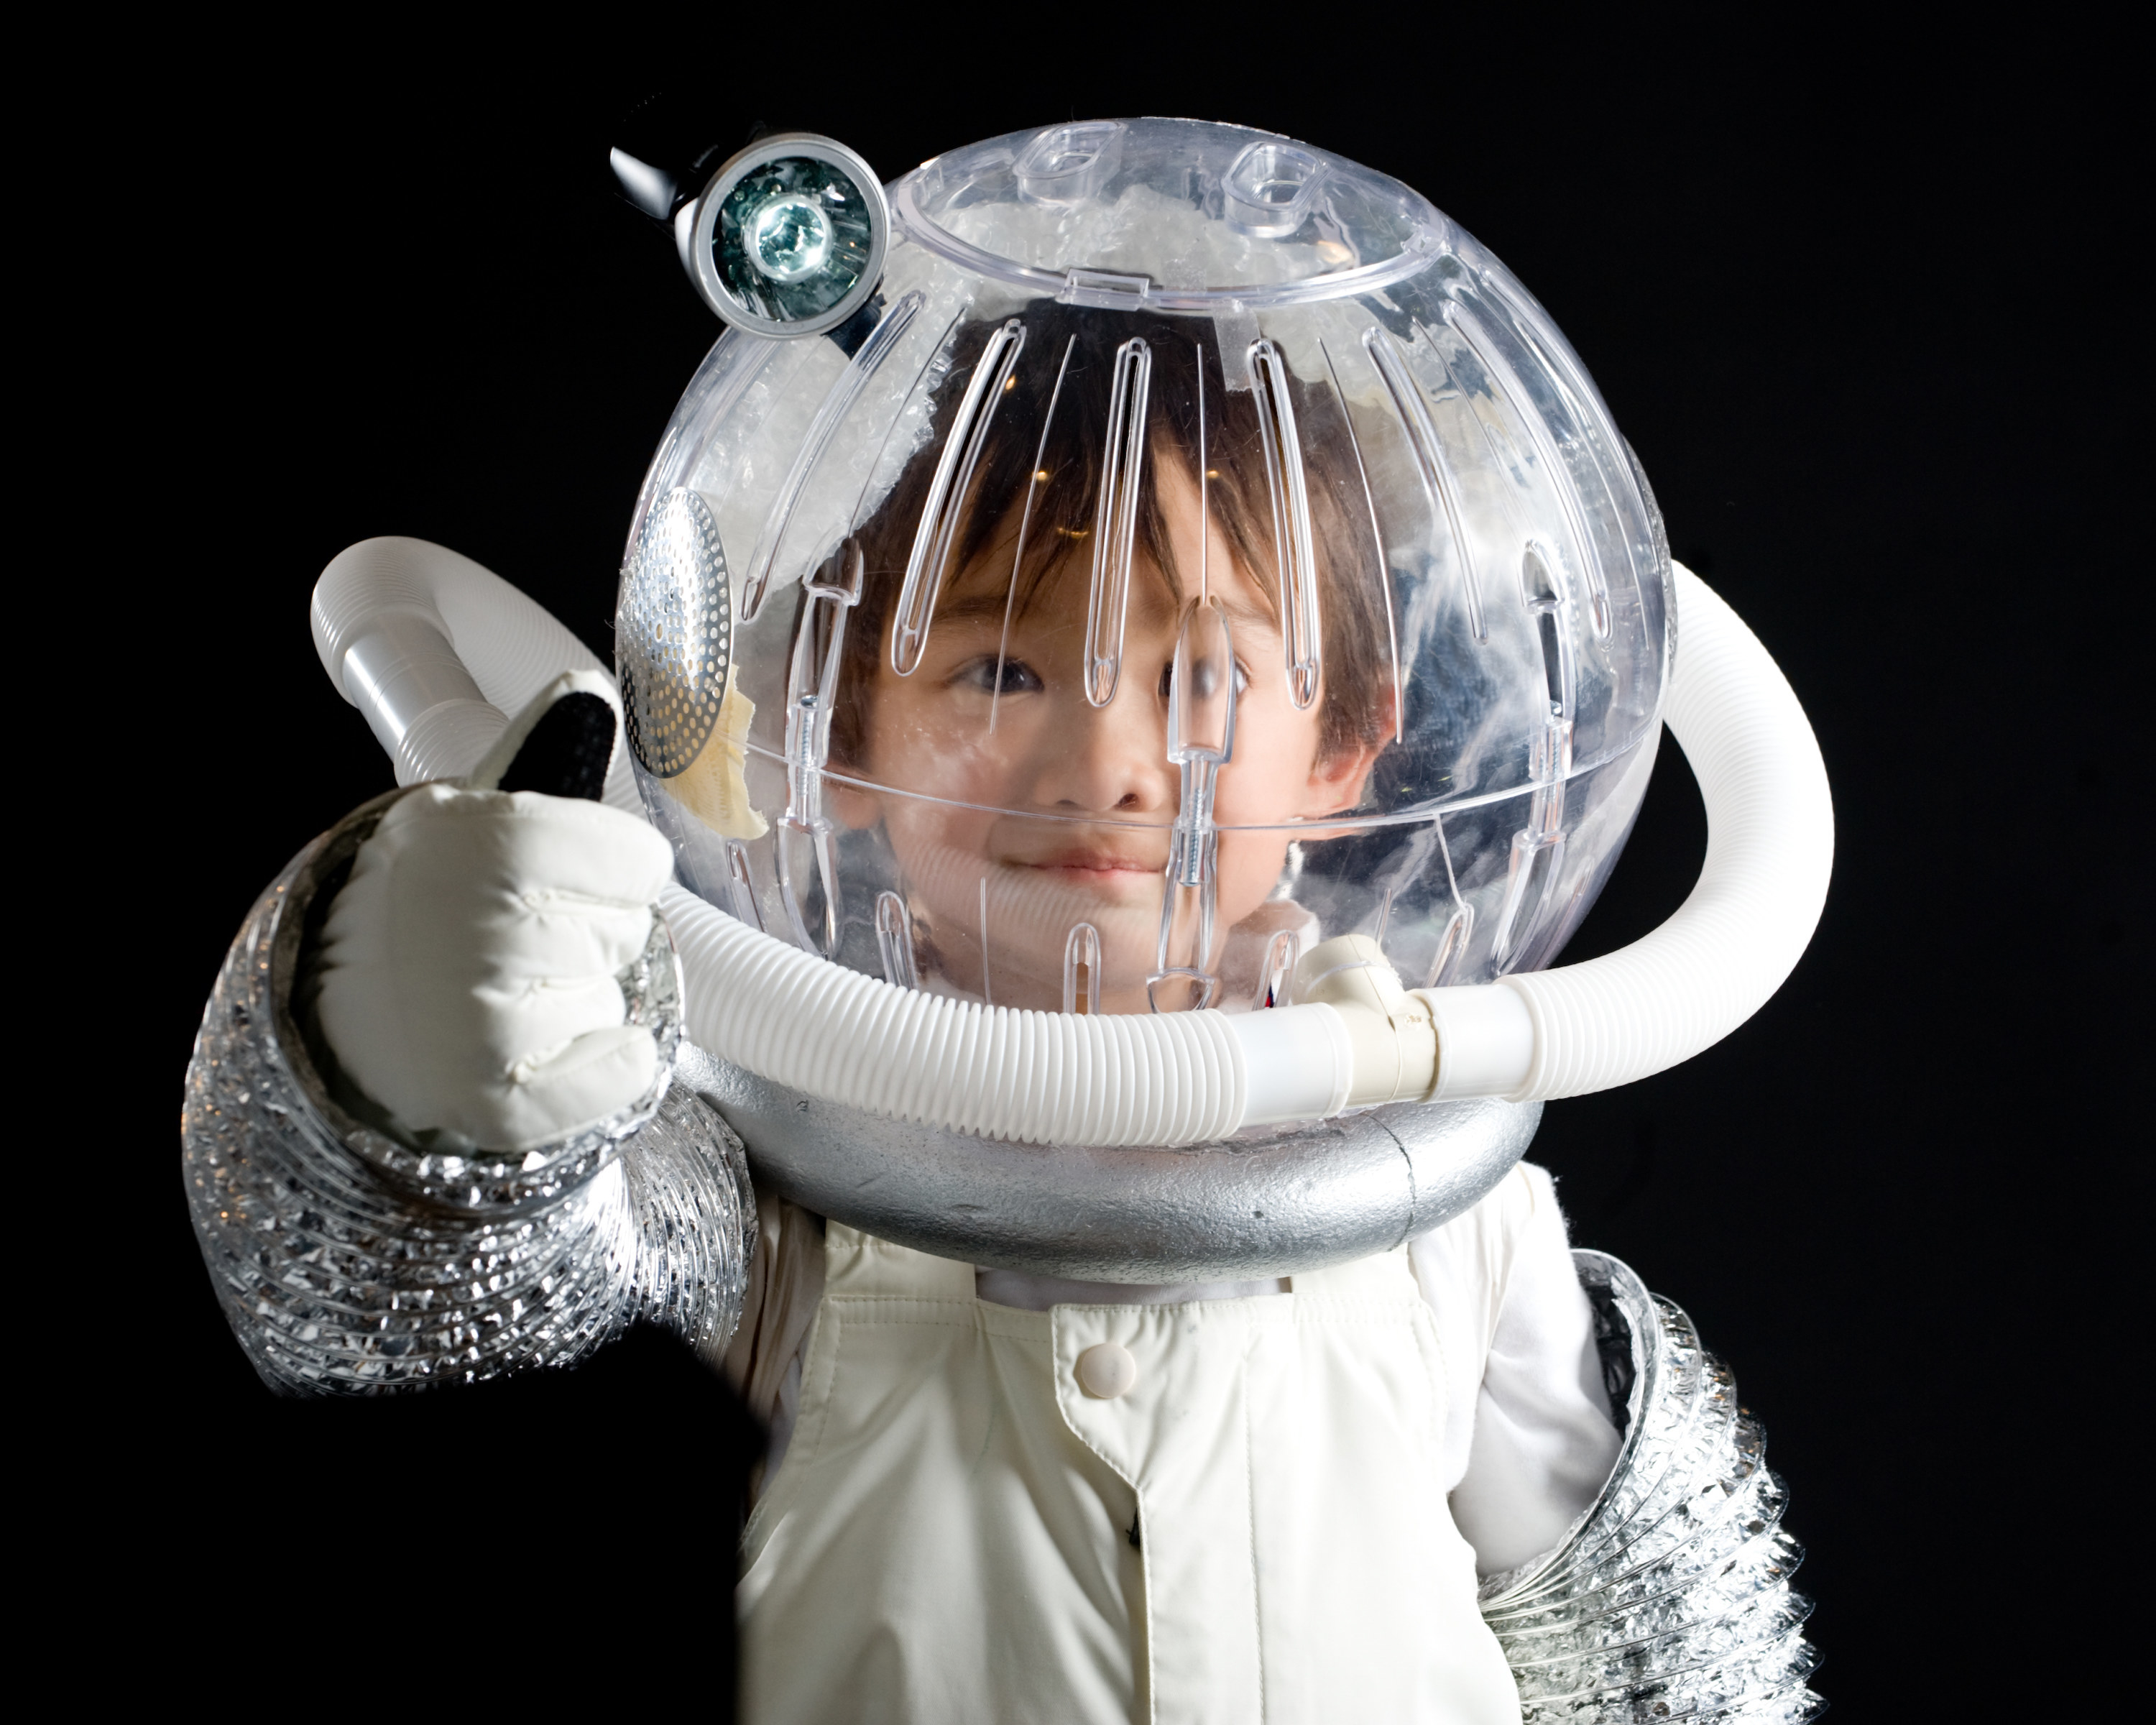 A young boy in a DIY astronaut costume.